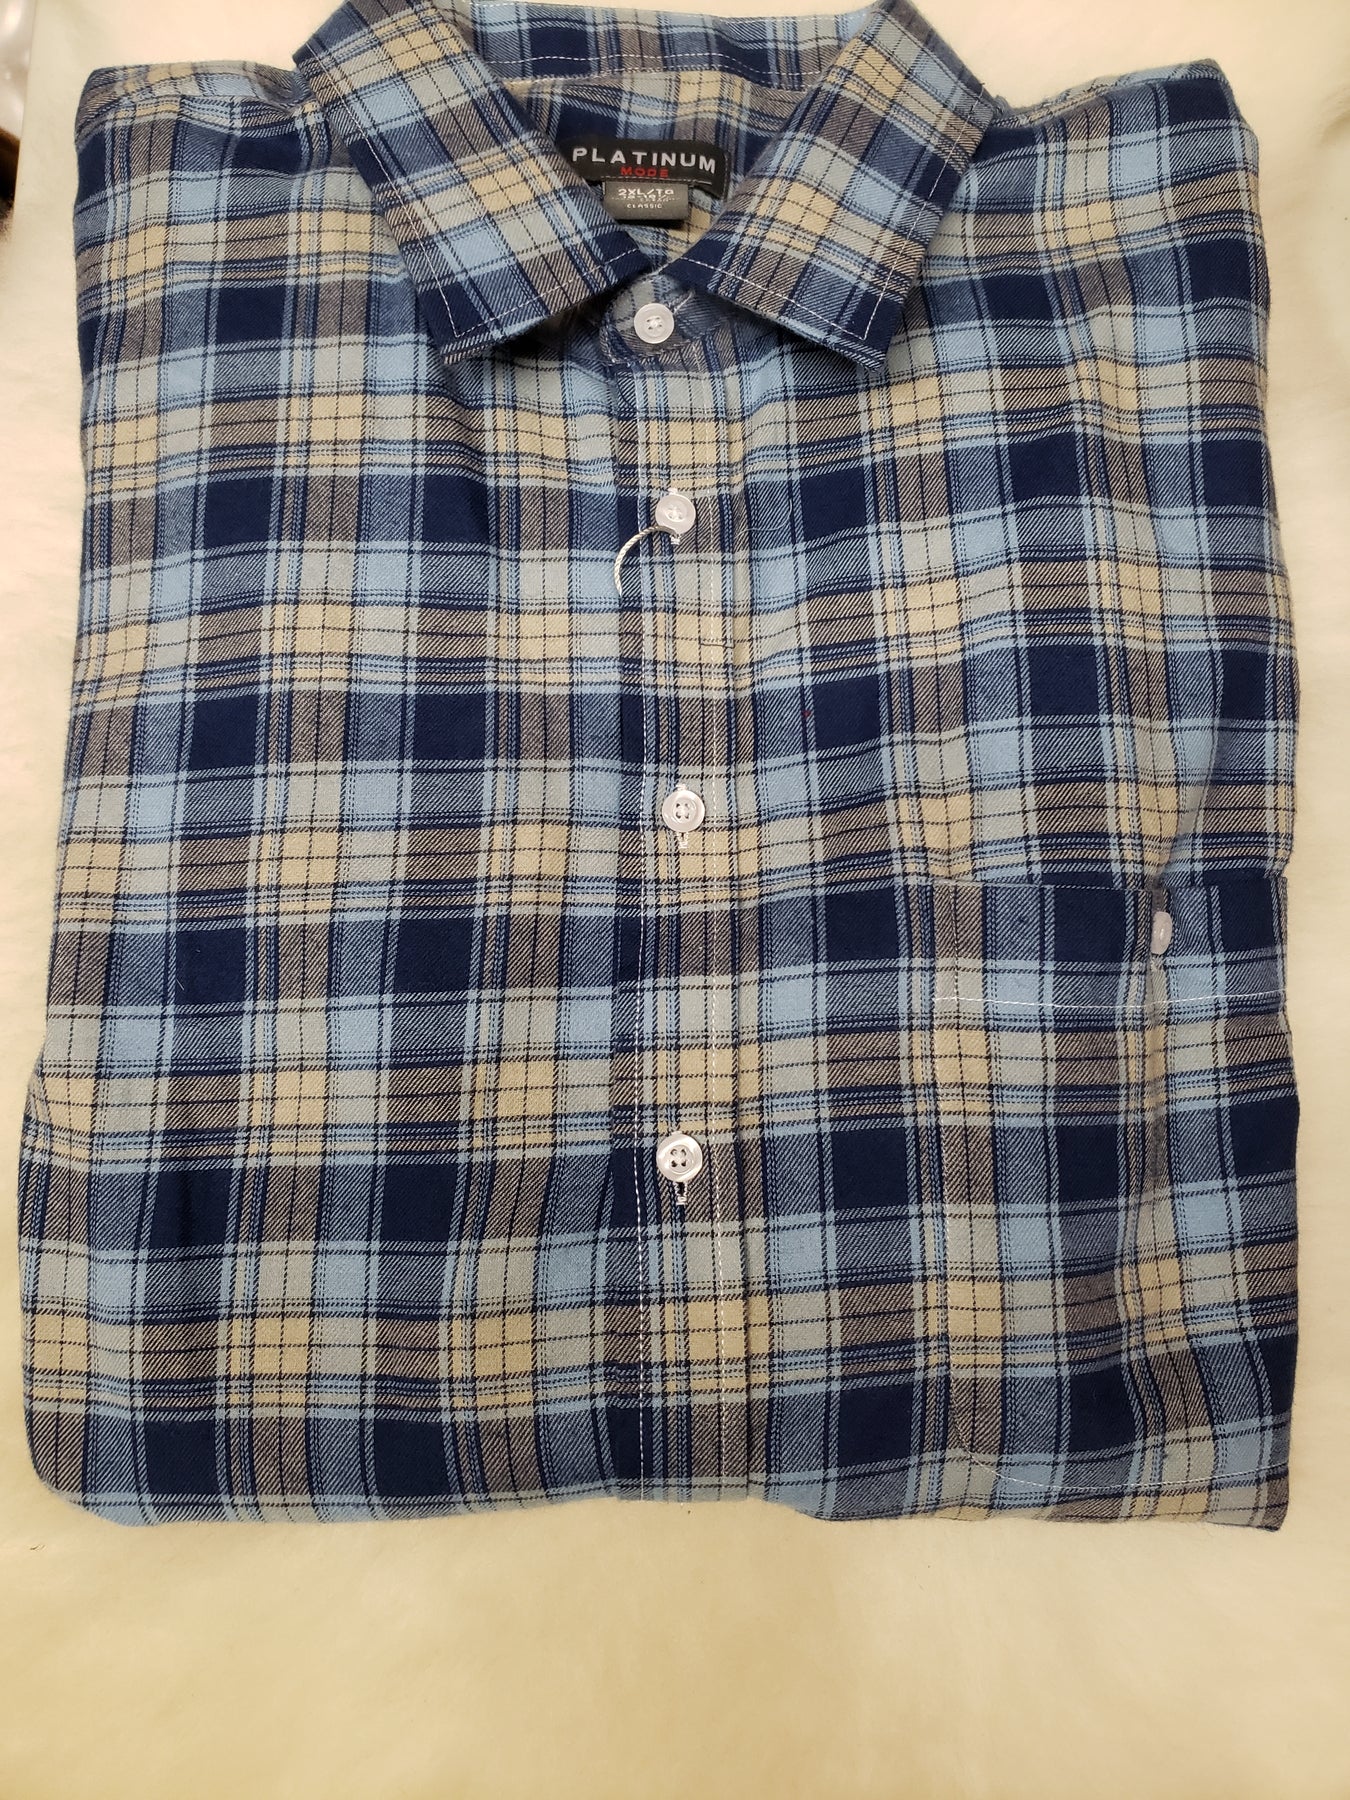 Tops/Shirts Men's – The Real Wool Shop